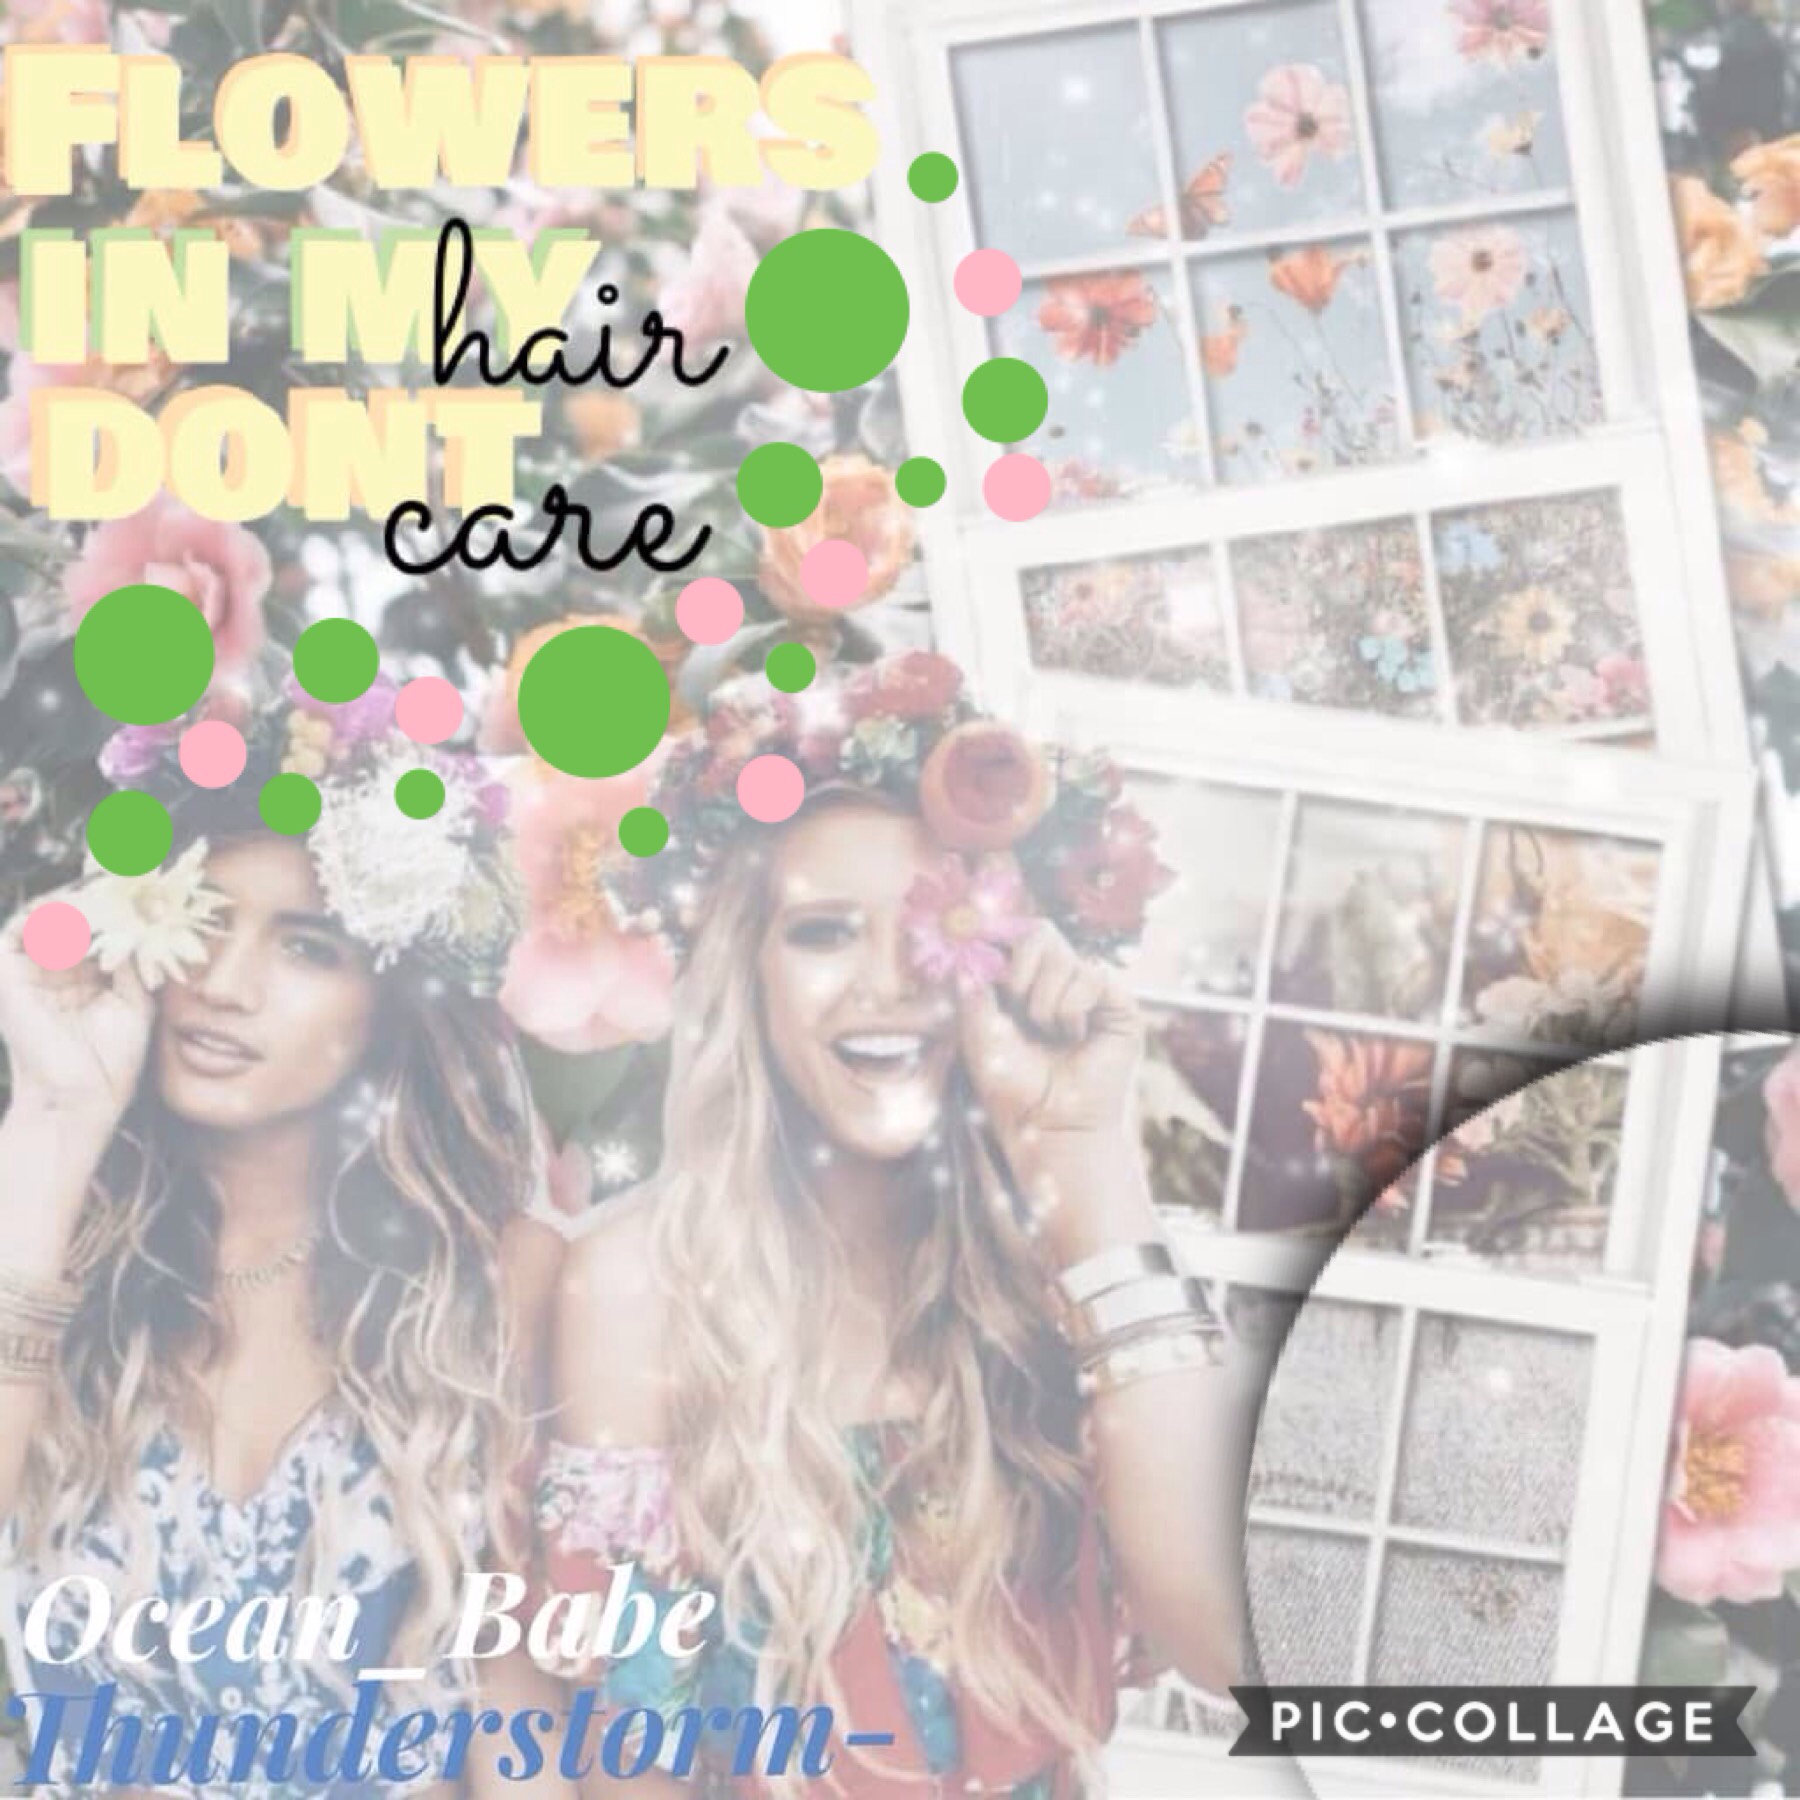 Collab with...
The amazing thunderstorm- go check out her account her collages are so gorgeous and she is just super nice🤗💗✌️